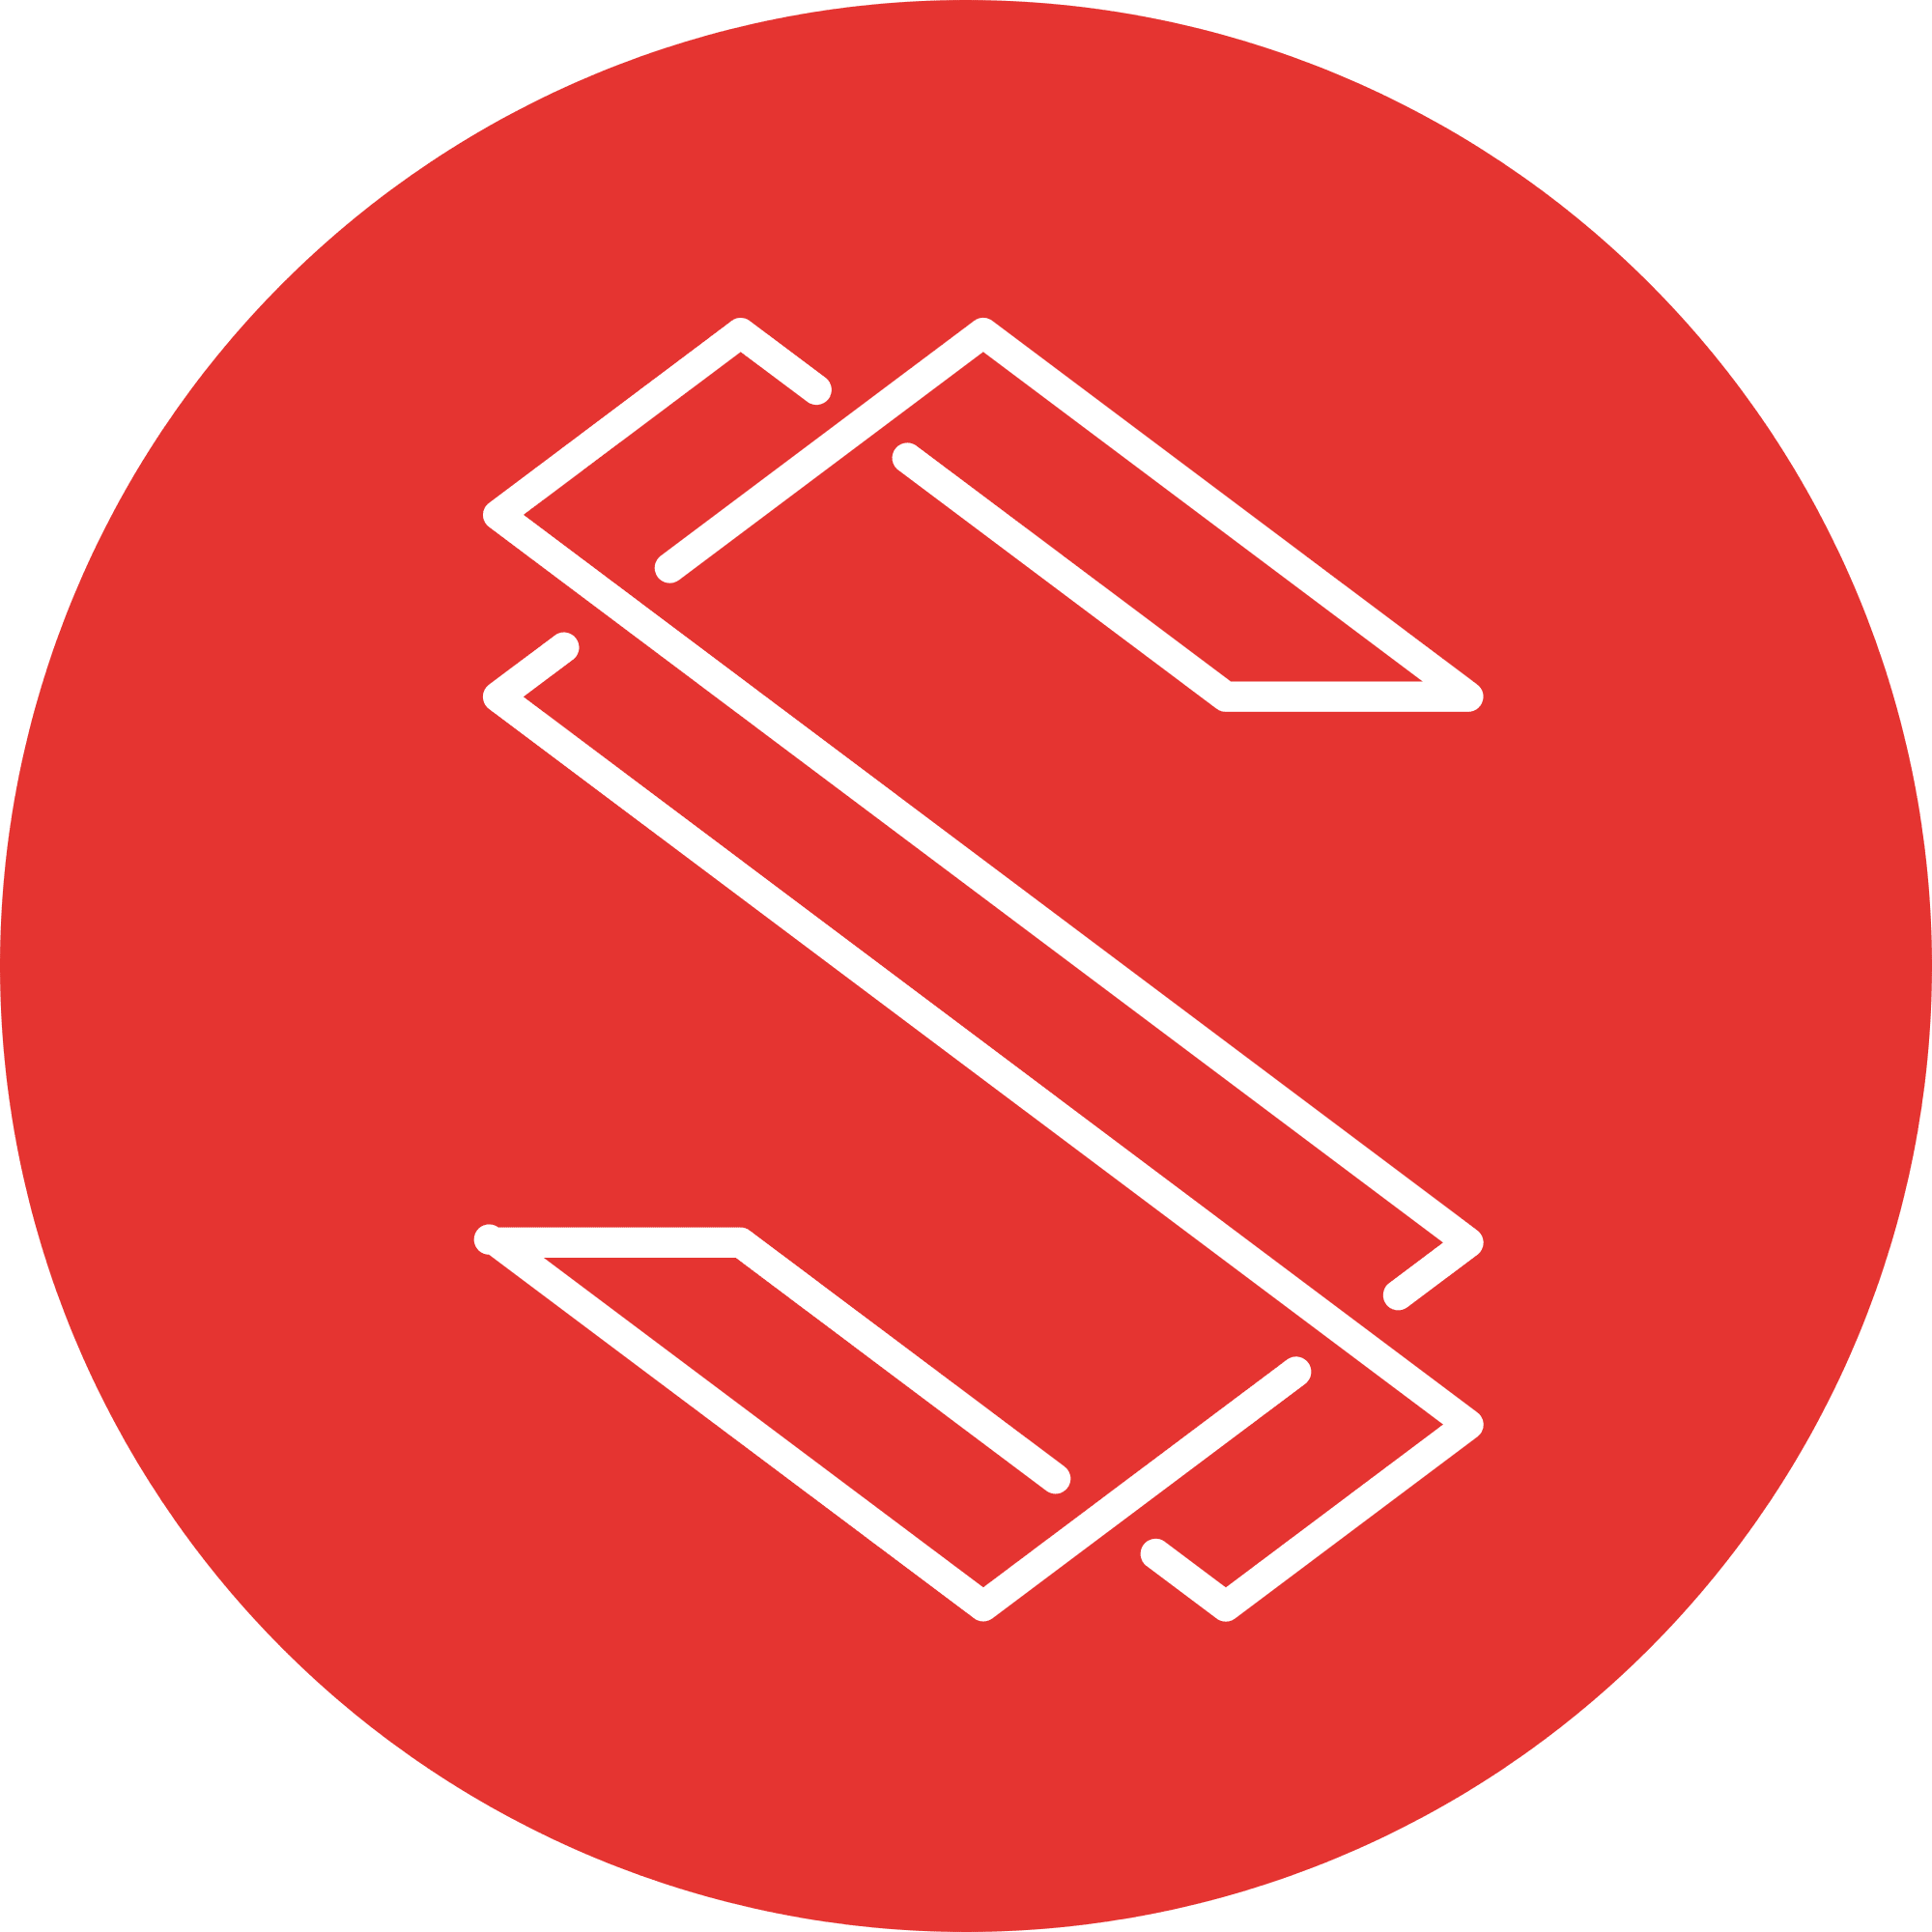 Substratum logo in png format